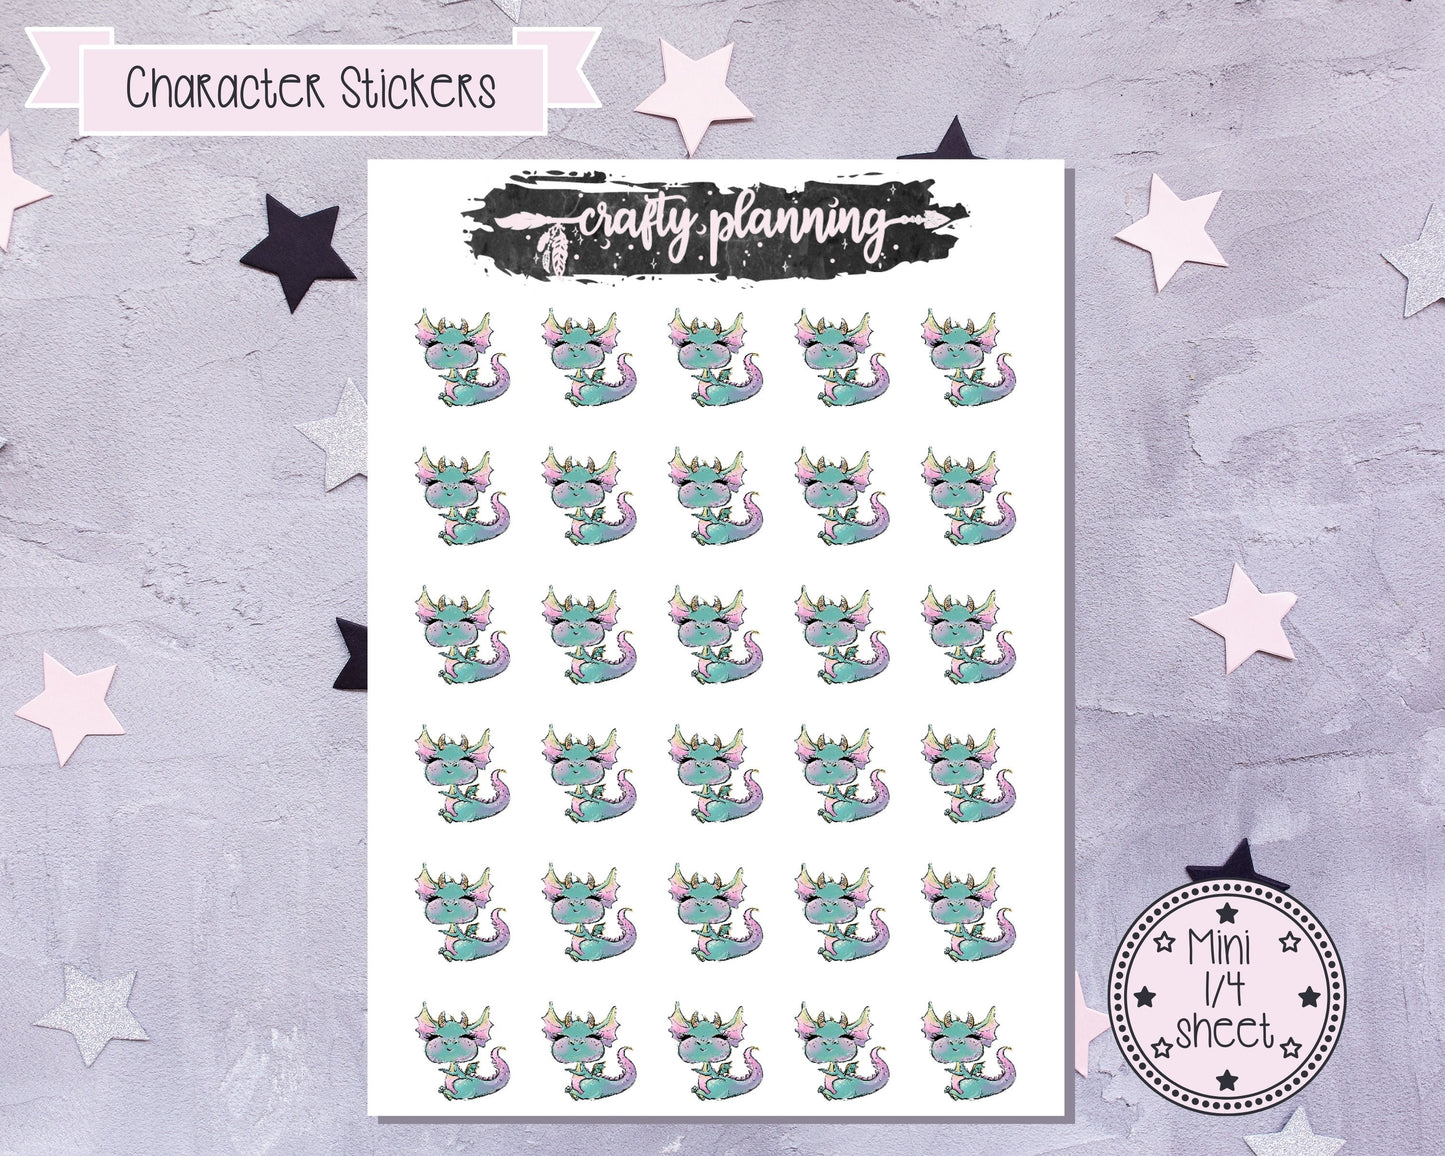 Dragon Stickers, Planner Stickers, Character Stickers, Cute Dragon Stickers